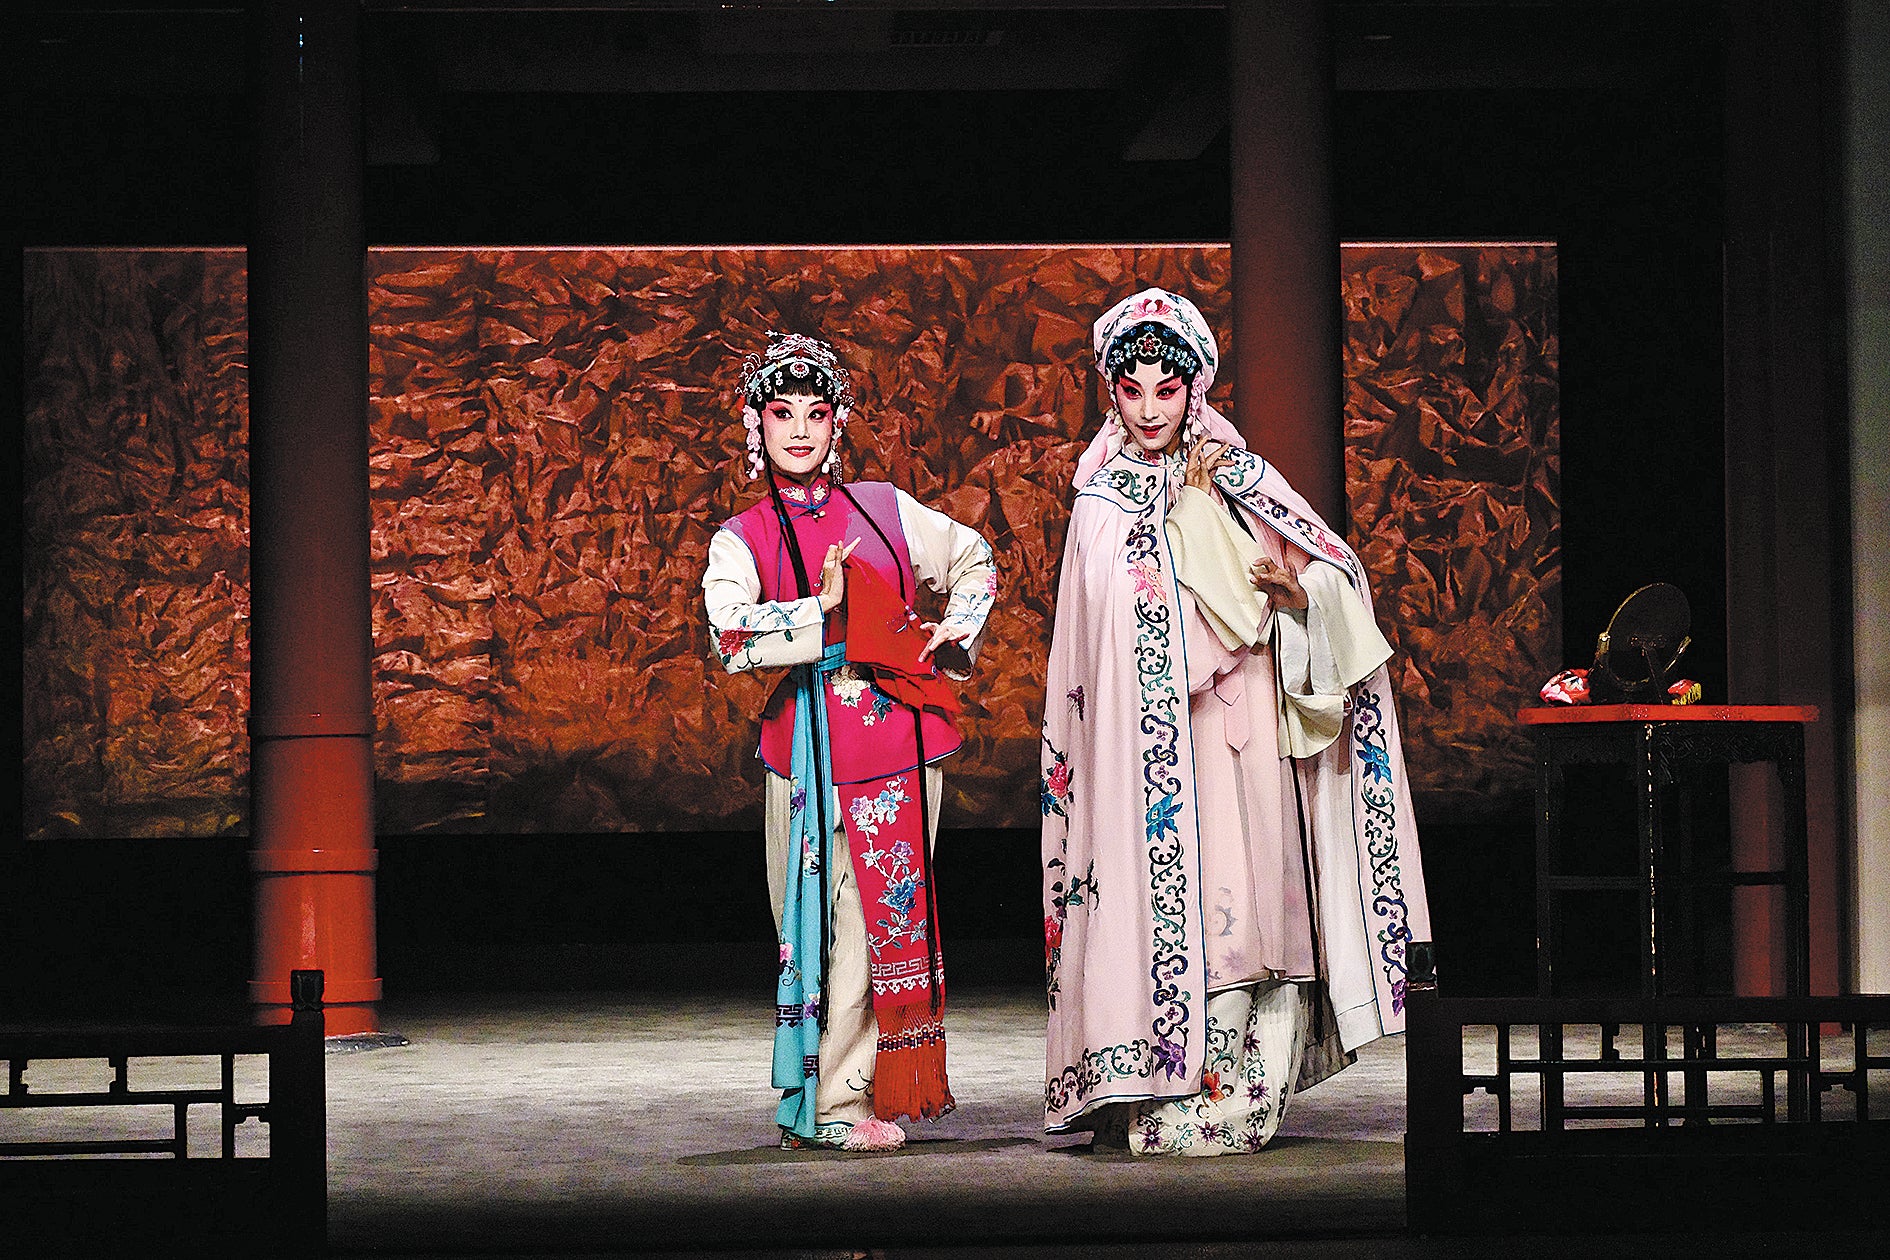 Kunqu Opera, one of the oldest traditional Chinese art forms, combines singing, dancing and acting